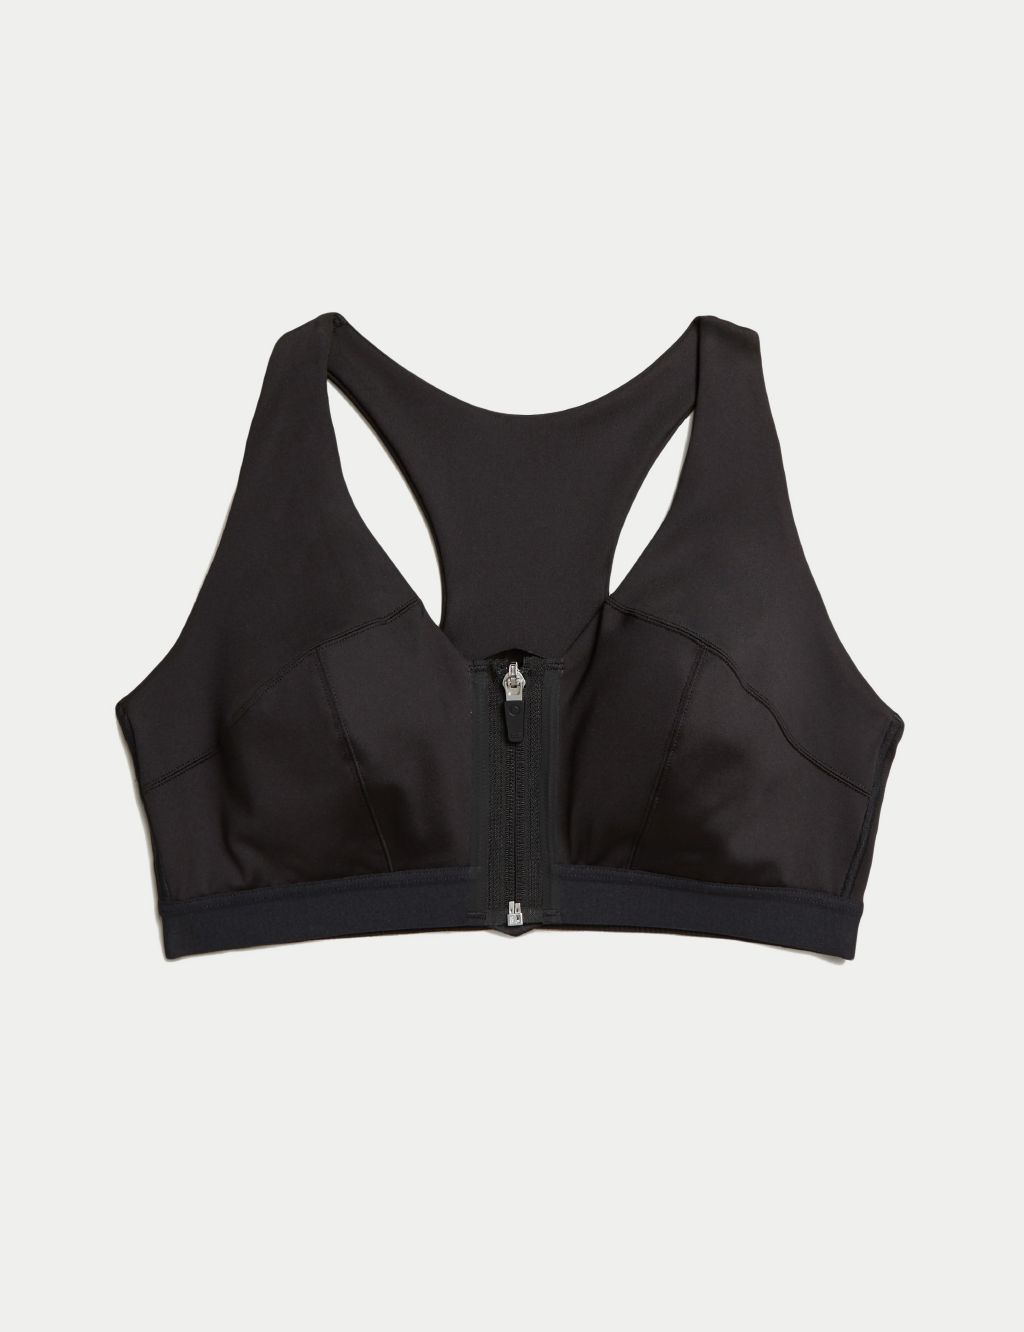 M&S ANGEL SPORTS Girls NON WIRED HIGH IMPACT SPORTS BRA In CARBON GREY Size  34AA £9.99 - PicClick UK